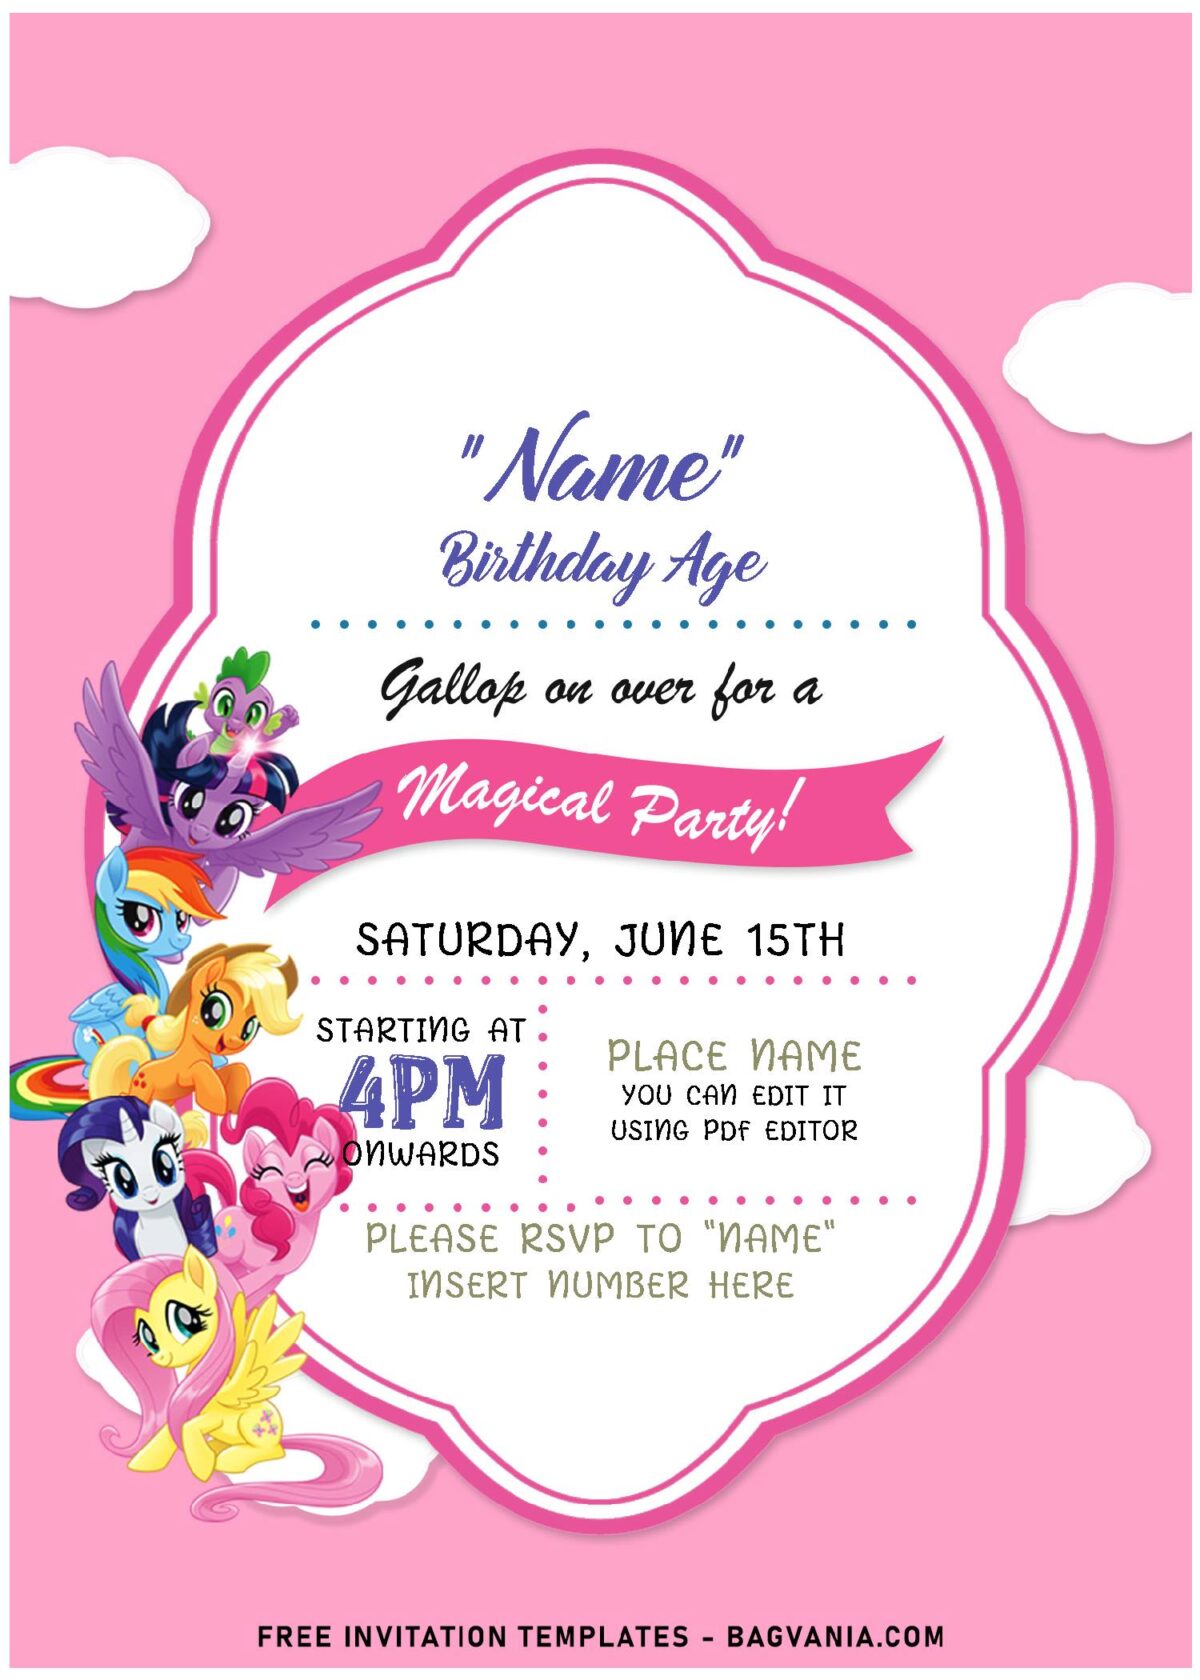 (Free Editable PDF) Lovely Cute My Little Pony Birthday Invitation Templates with cute pink ribbon